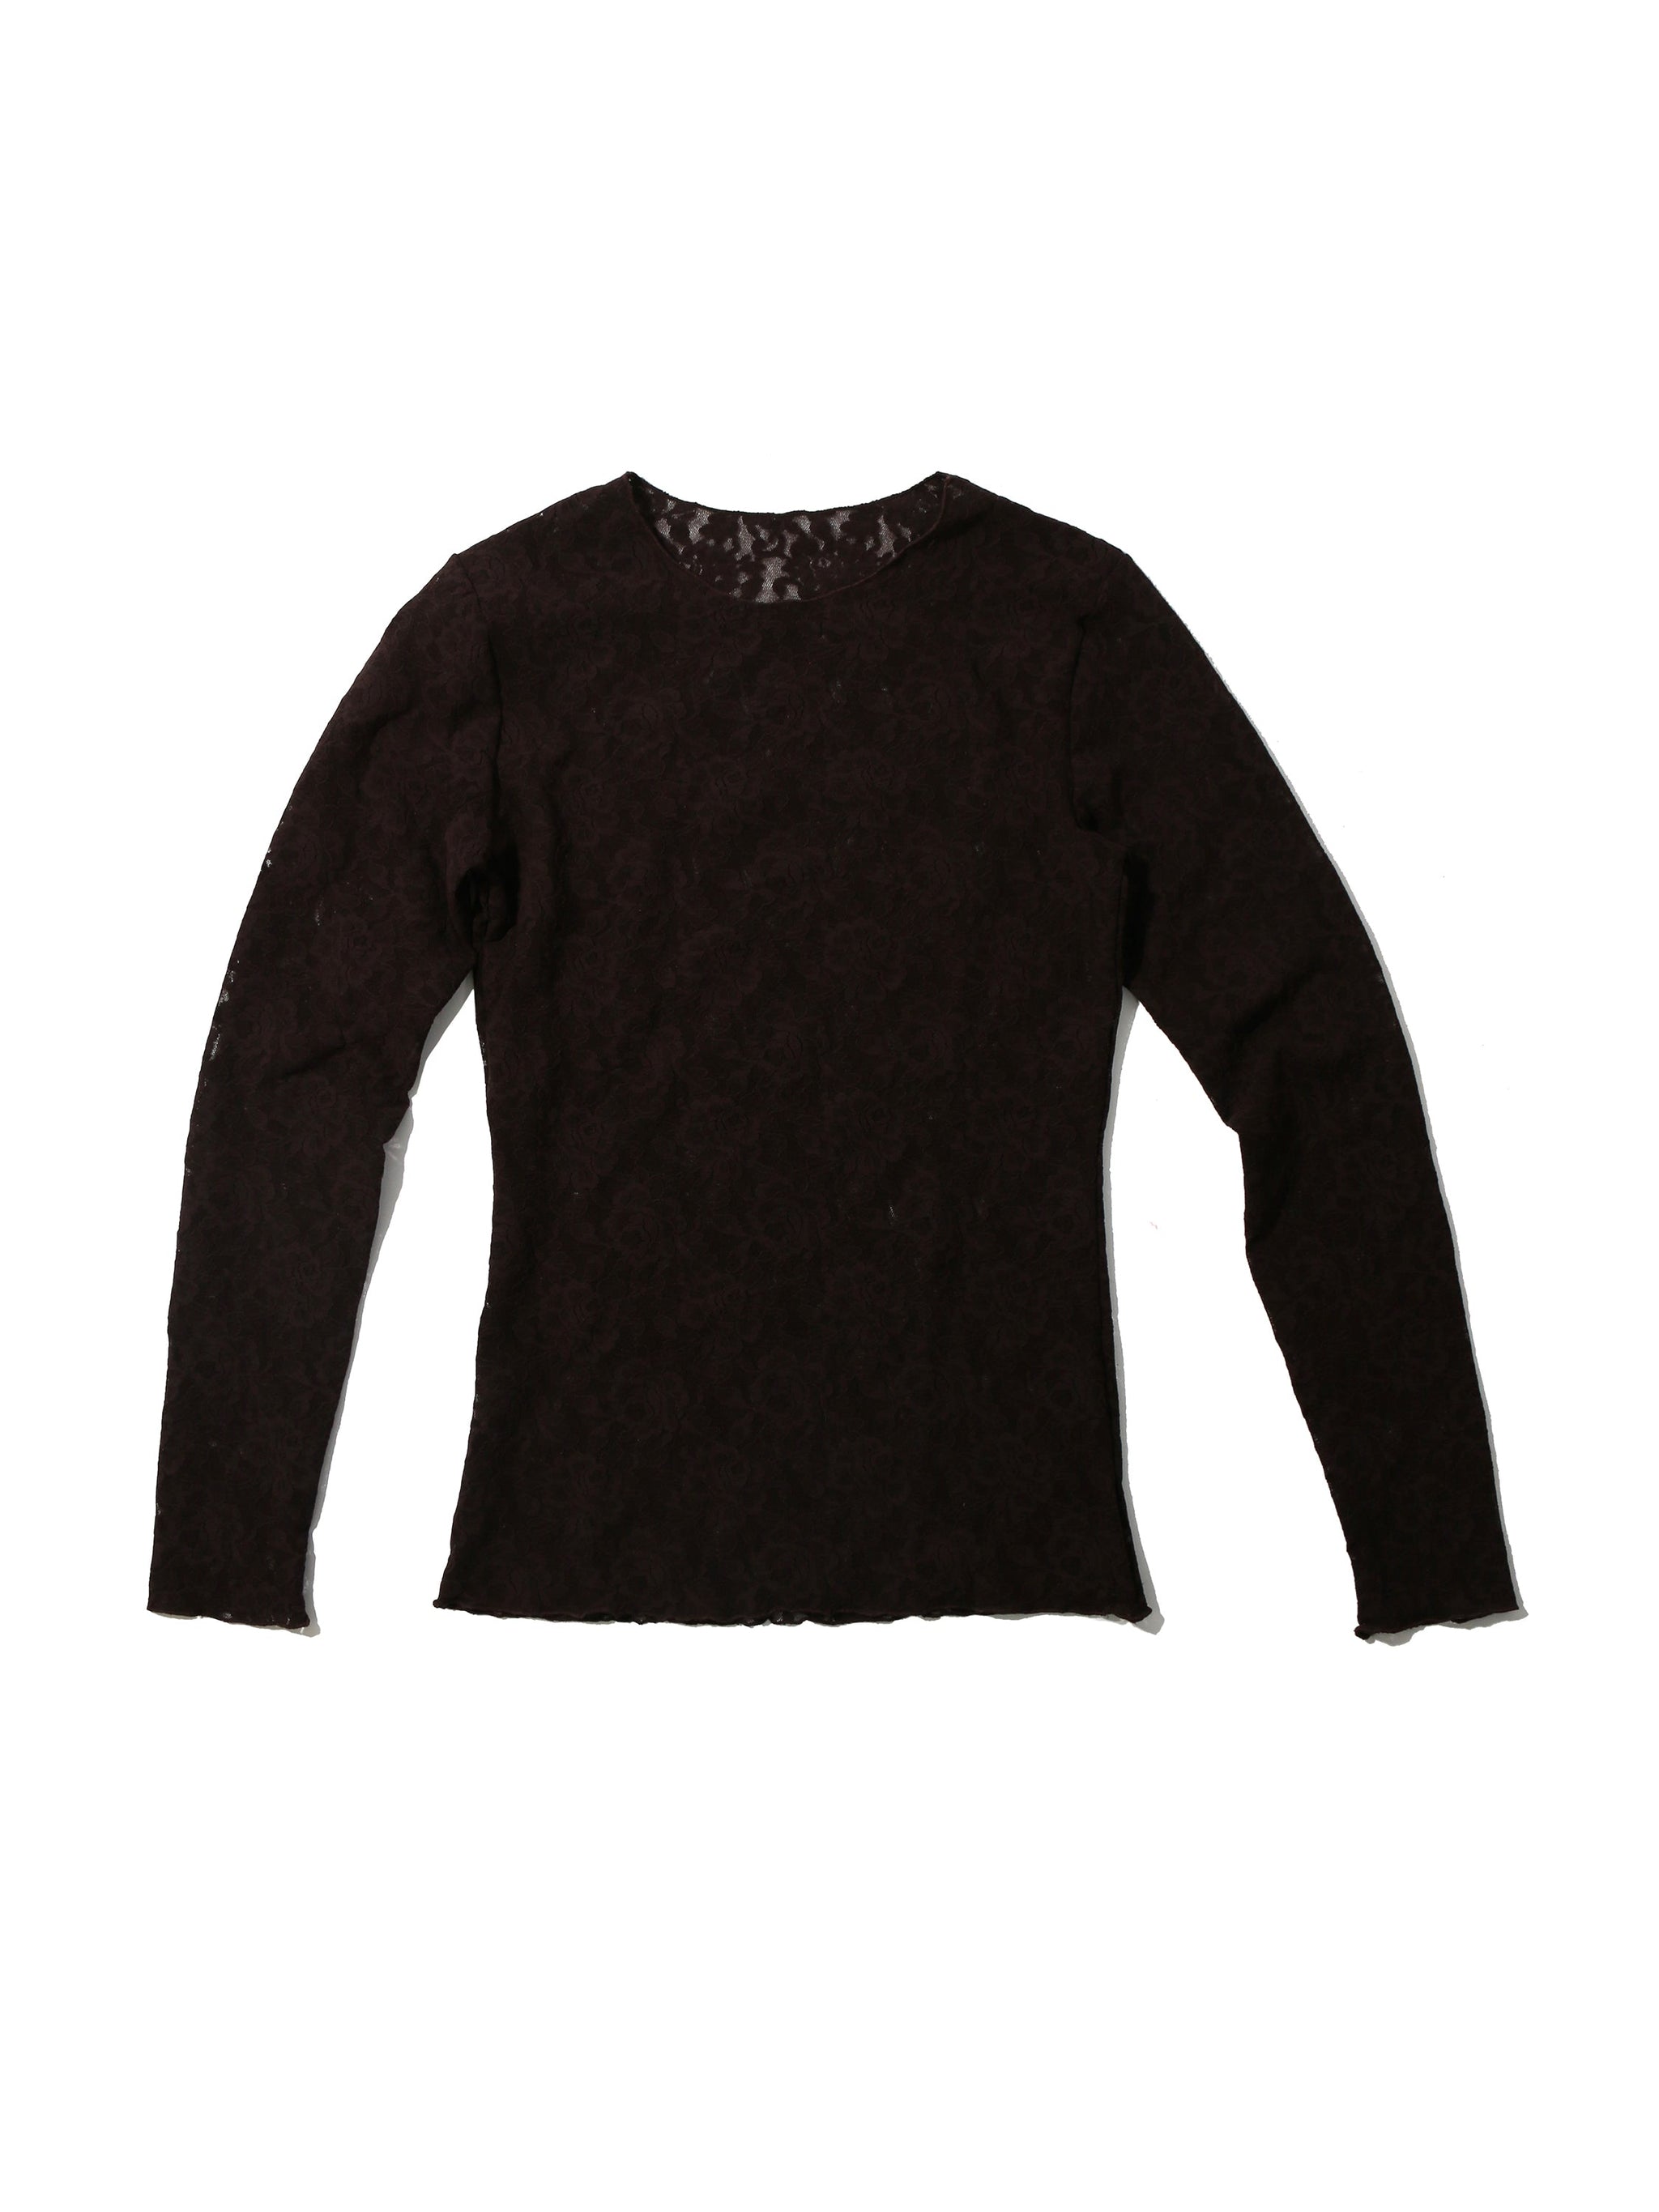 Signature Lace Long Sleeve Top Chocolate Noir Brown